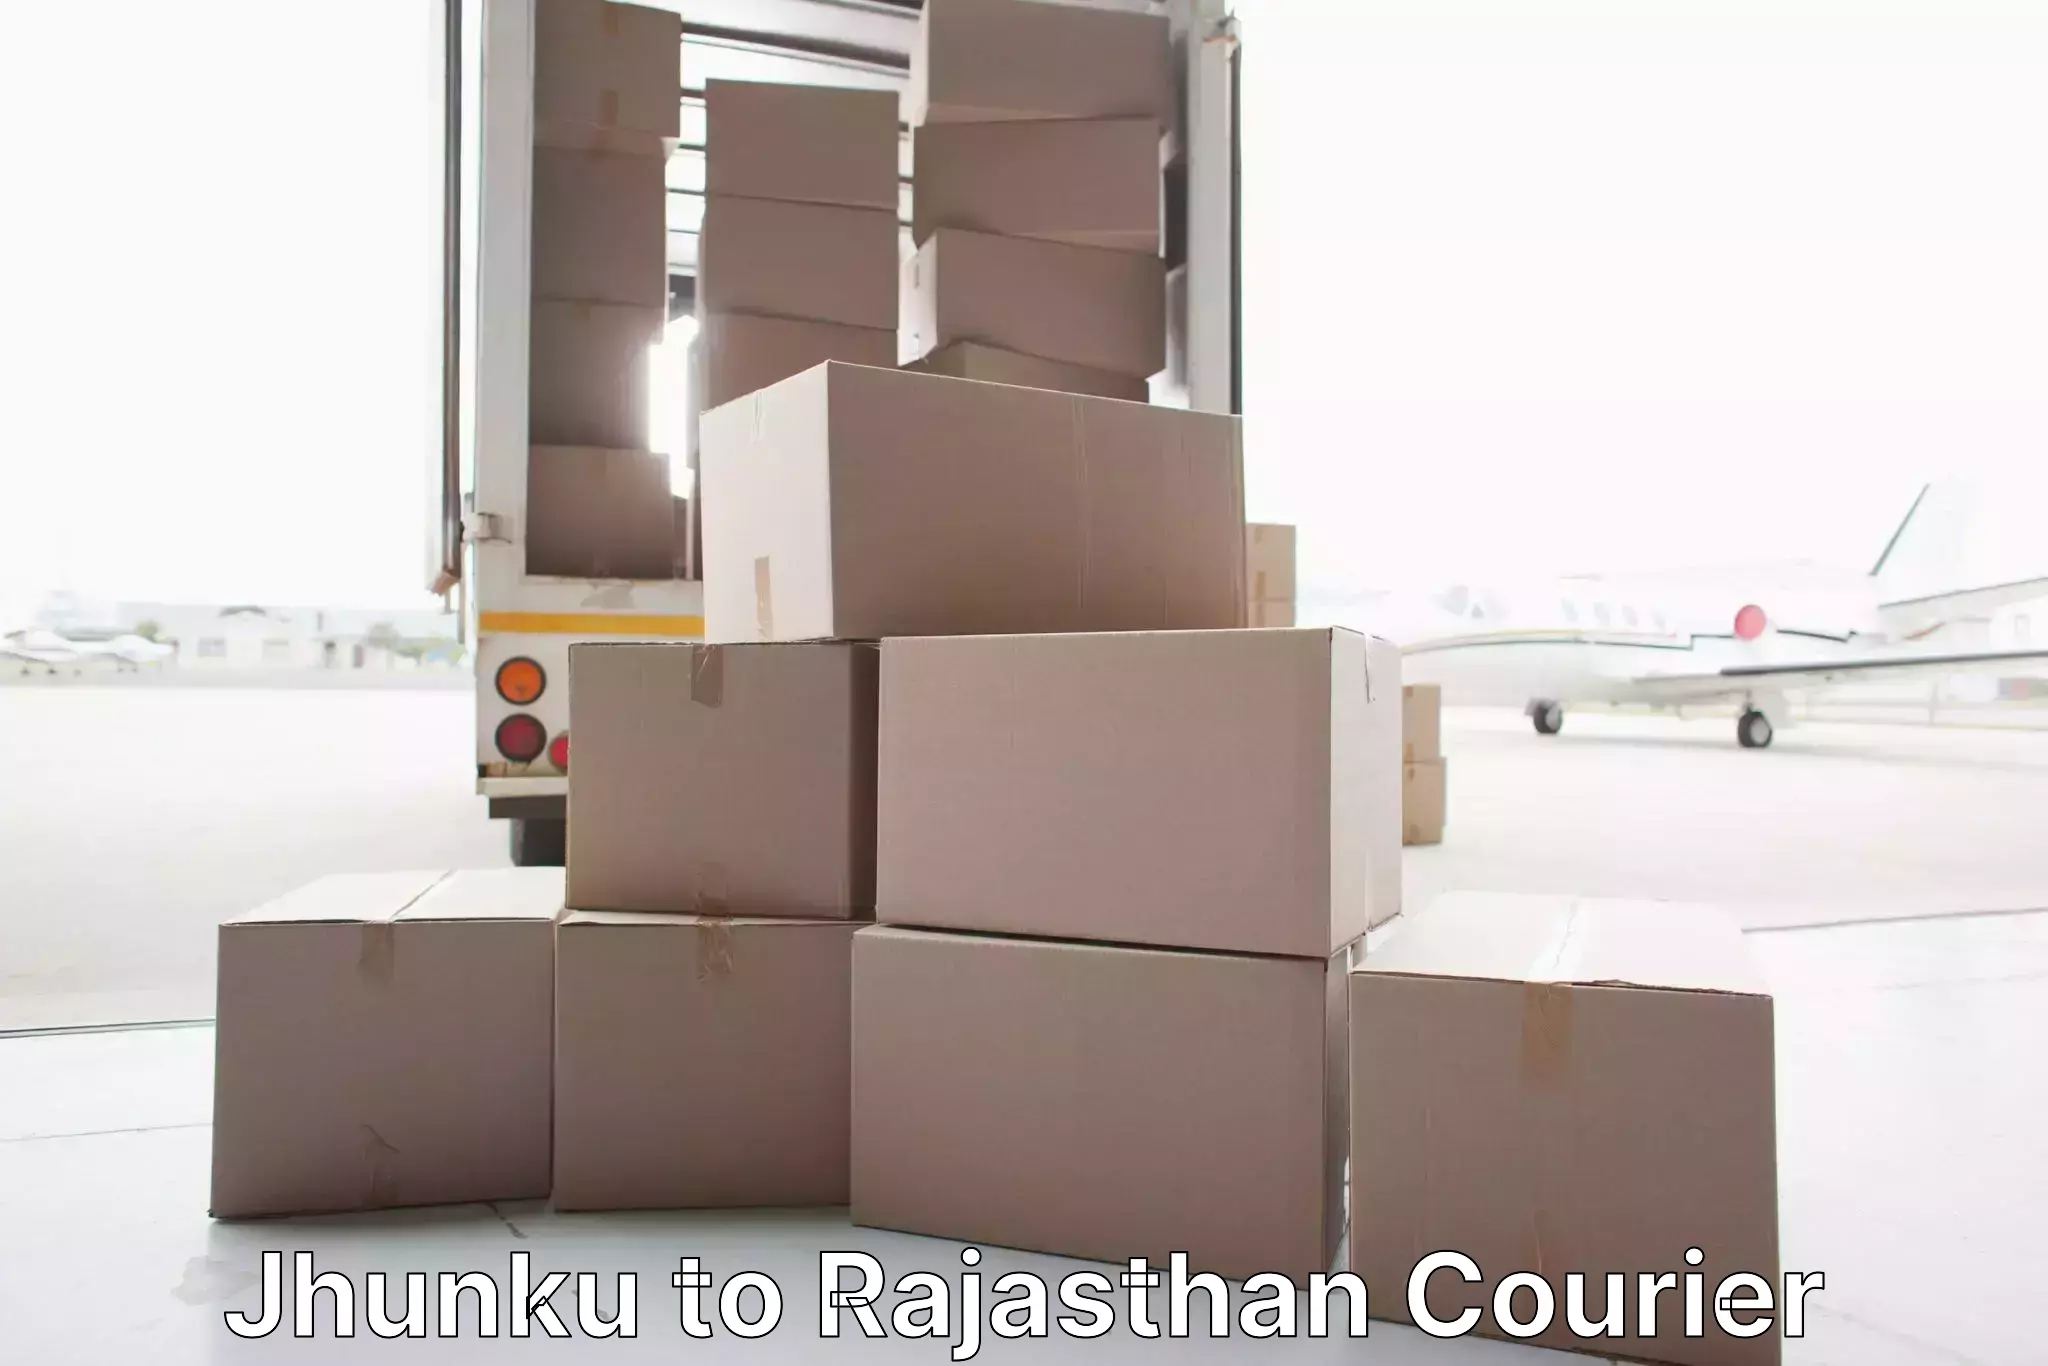 Moving and packing experts Jhunku to Rajasthan